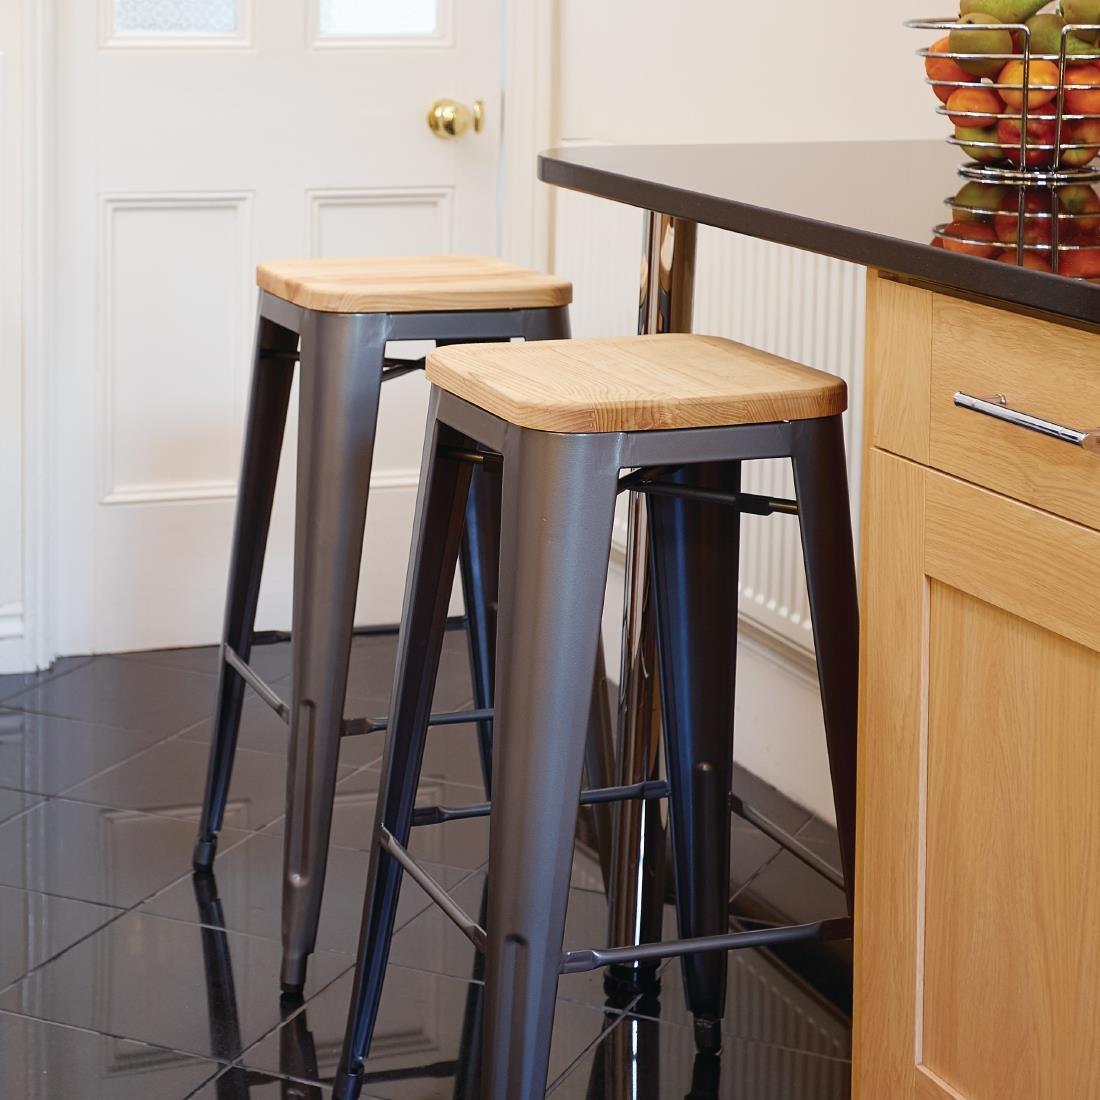 Bolero Bistro High Stools with Wooden Seat Pad Gun Metal (Pack of 4) - GM639  - 2